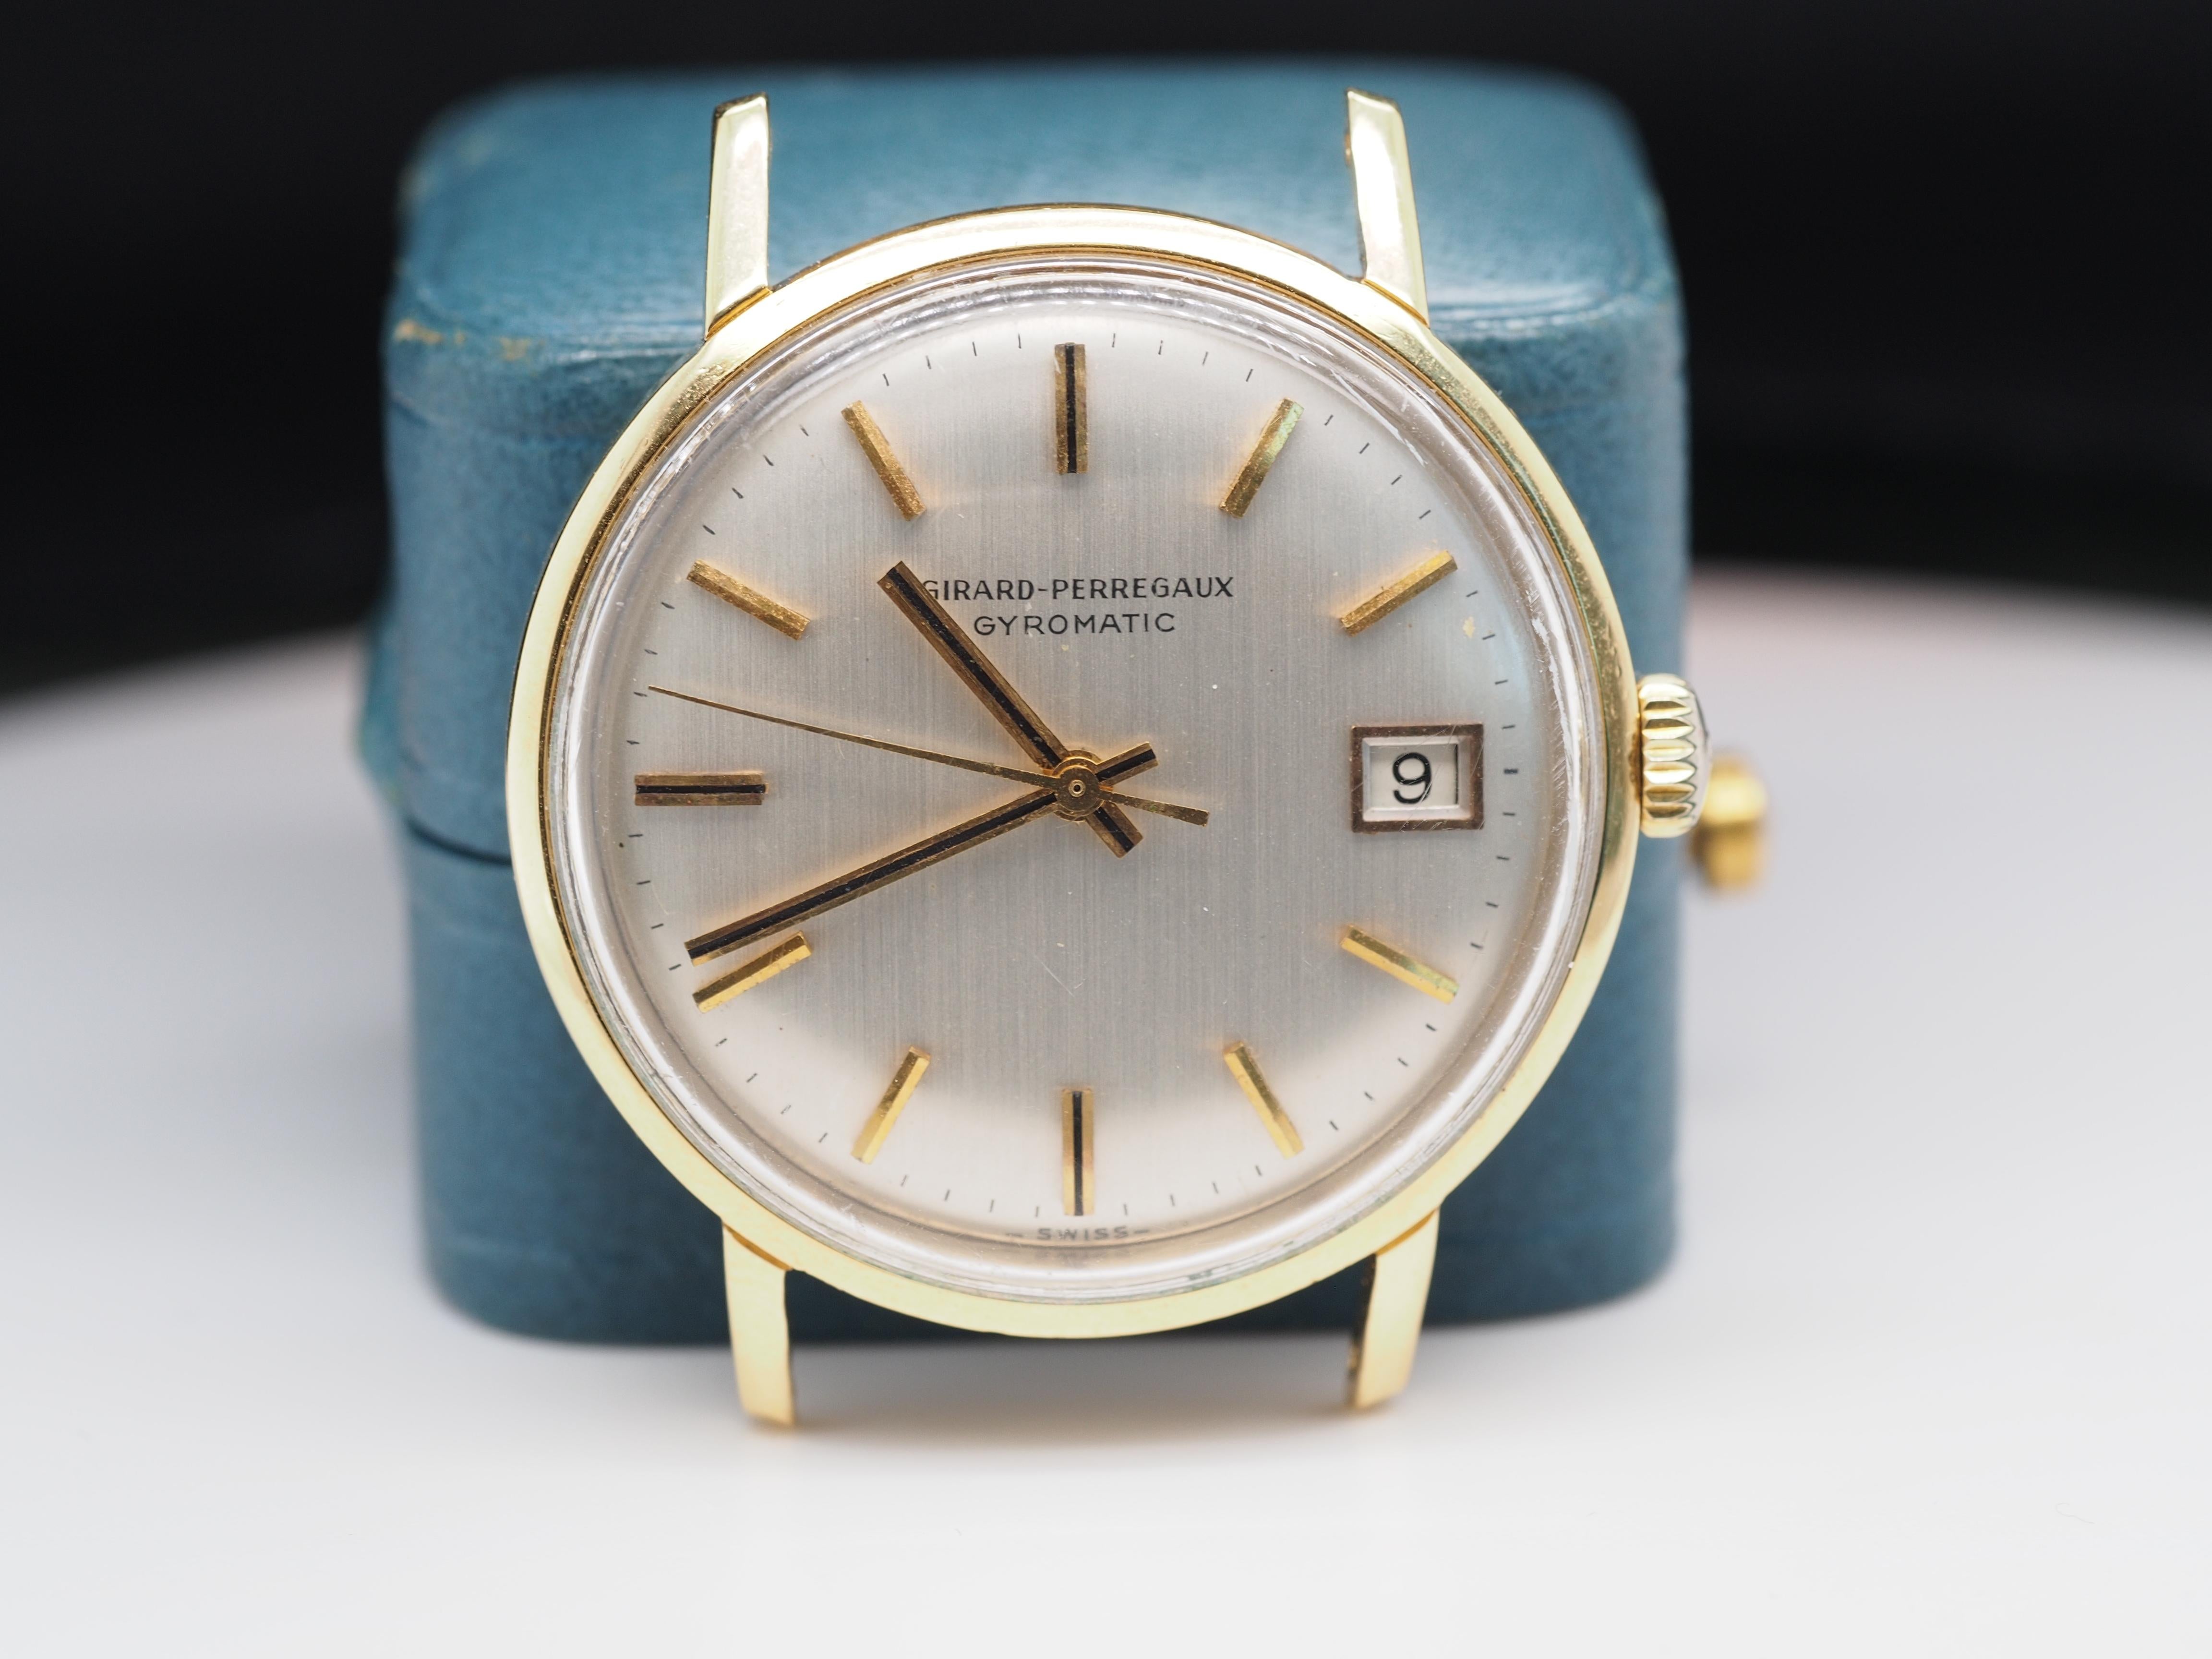 Item Details:
Case Size: 36mm
Metal Type: 18K Yellow Gold [Hallmarked, and Tested]
Weight: 33.0 grams
Watch Maker: Girard Perregaux
Movement Maker: Girard Perregaux
Condition: Excellent, Running.